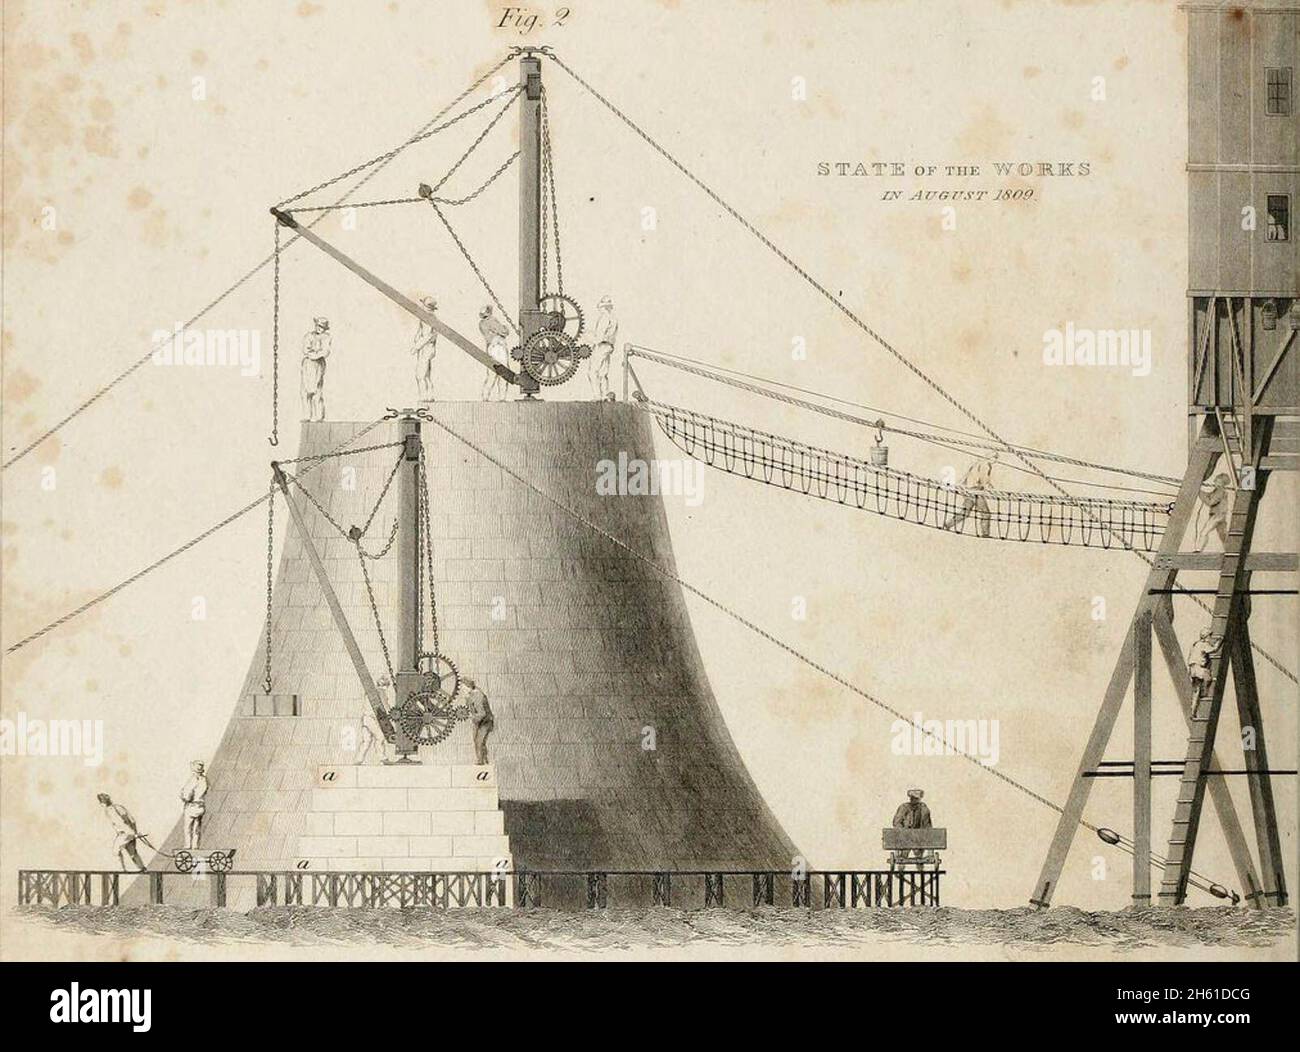 Engraving of the lighthouse under construction in 1809, Stock Photo